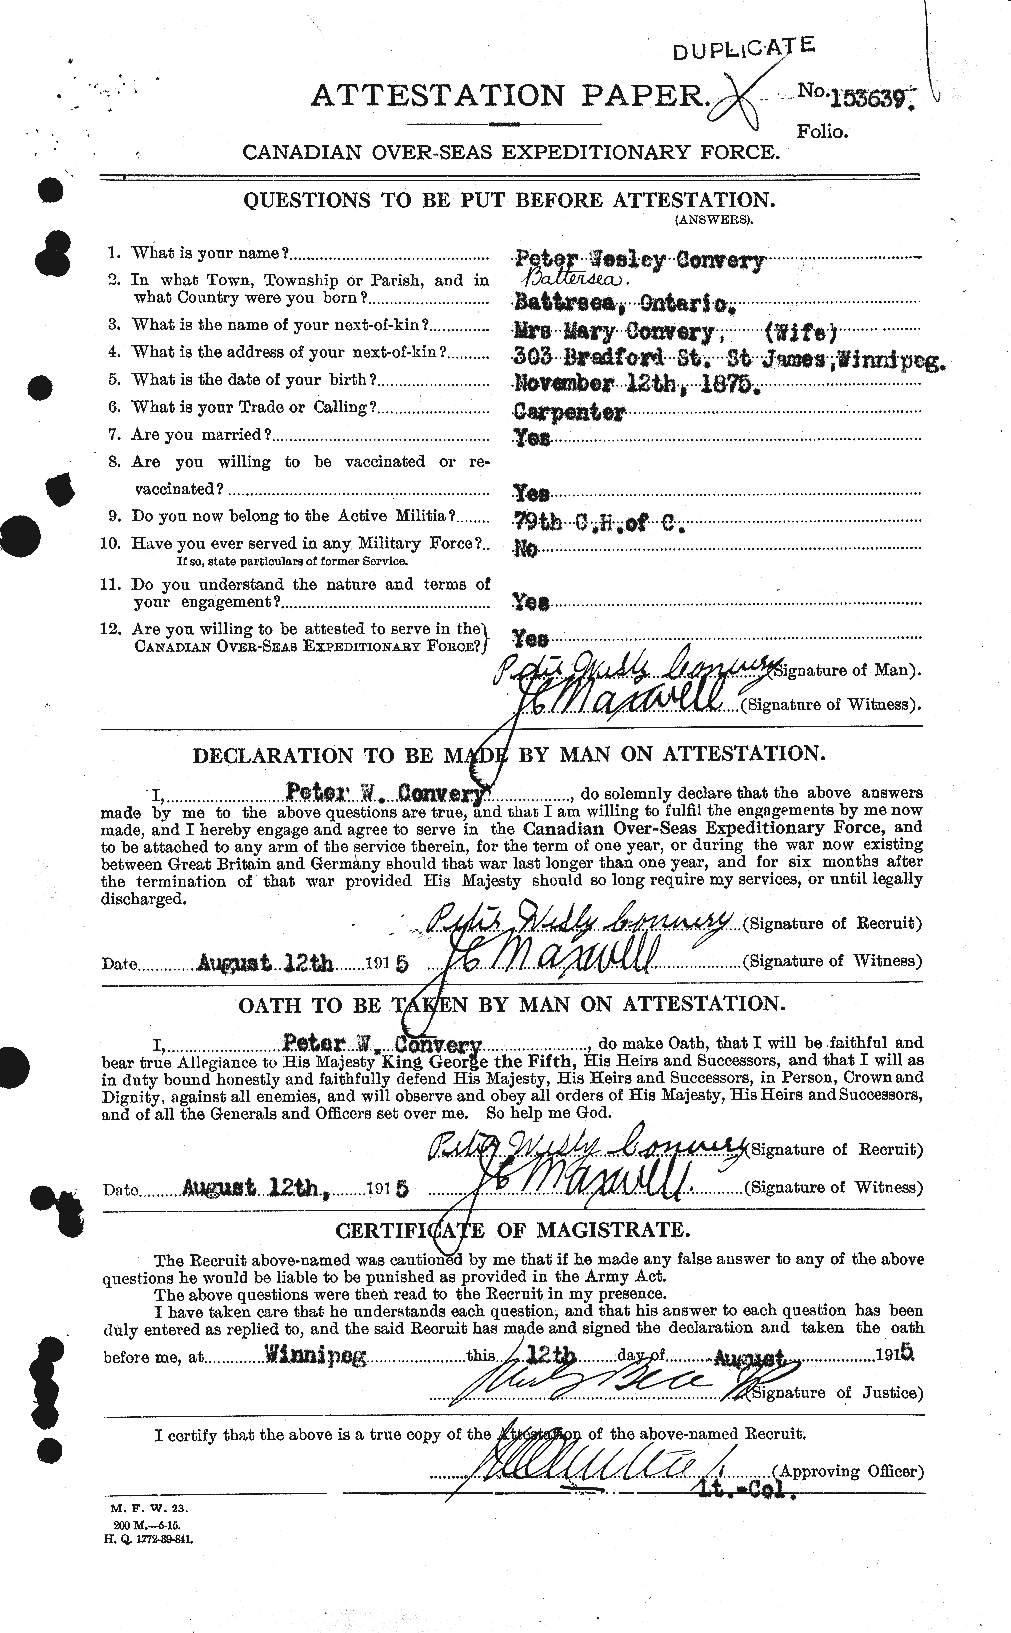 Personnel Records of the First World War - CEF 073533a